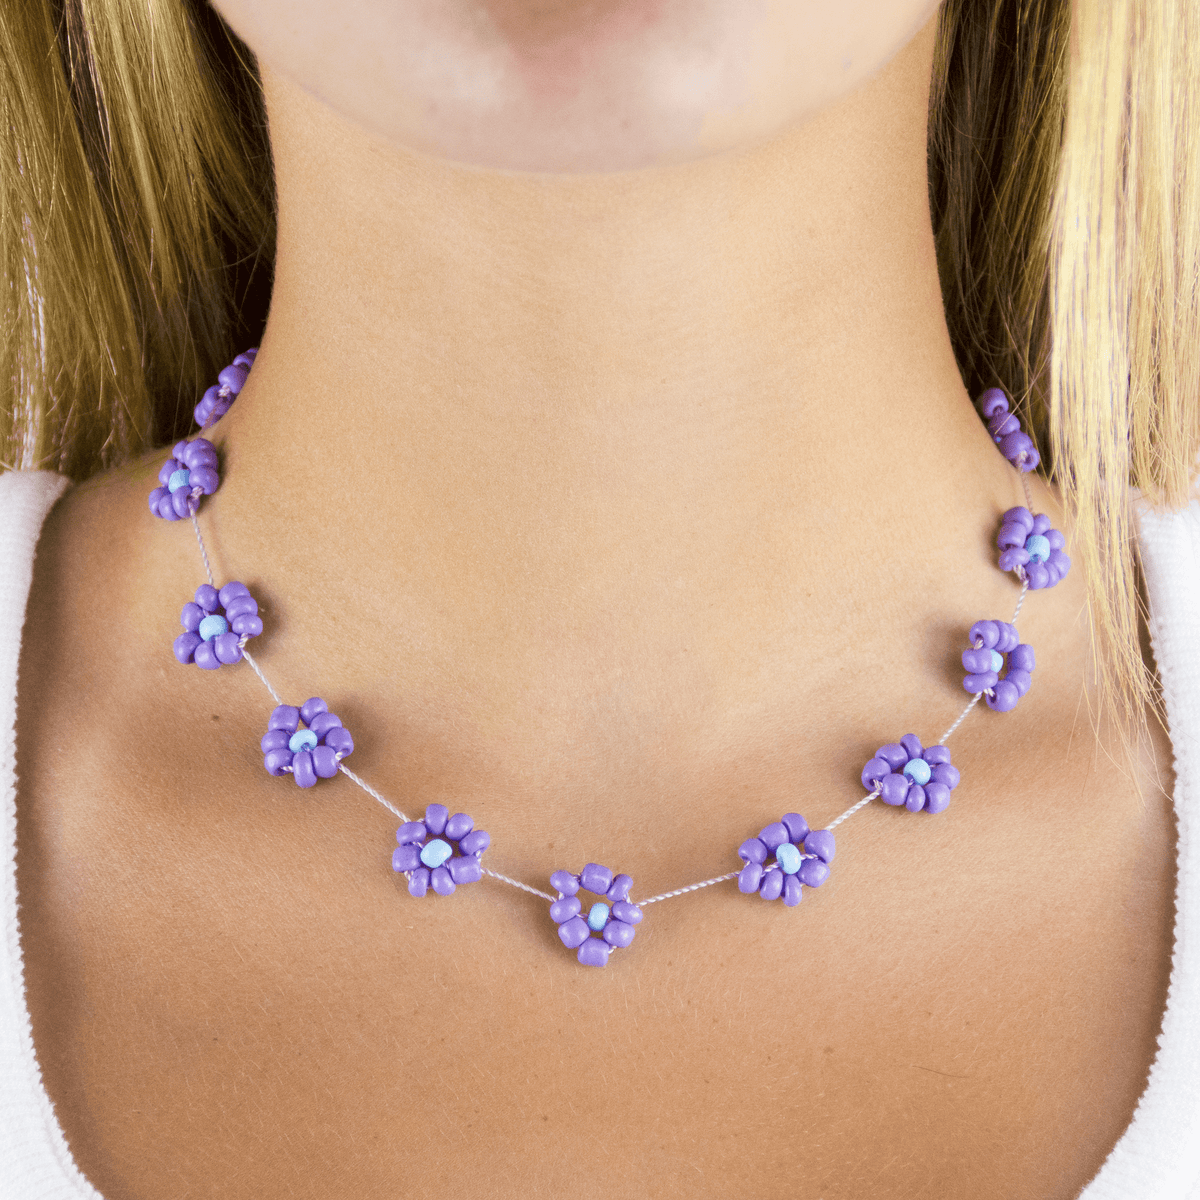 Large Daisy Chain Necklace - Josephine Alexander Collective